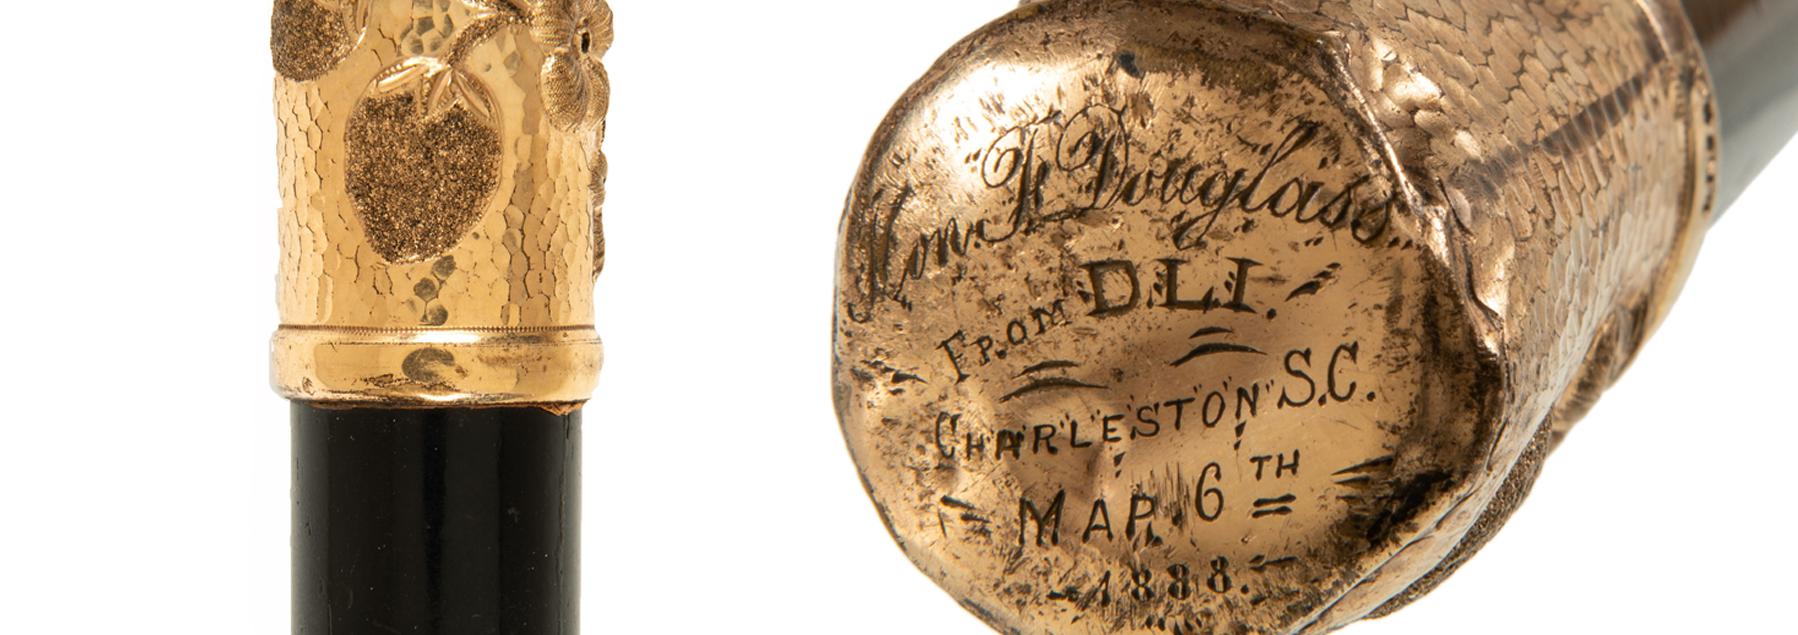 Showing the top of a walking stick. It is gold with fruit on the side and text on the top.